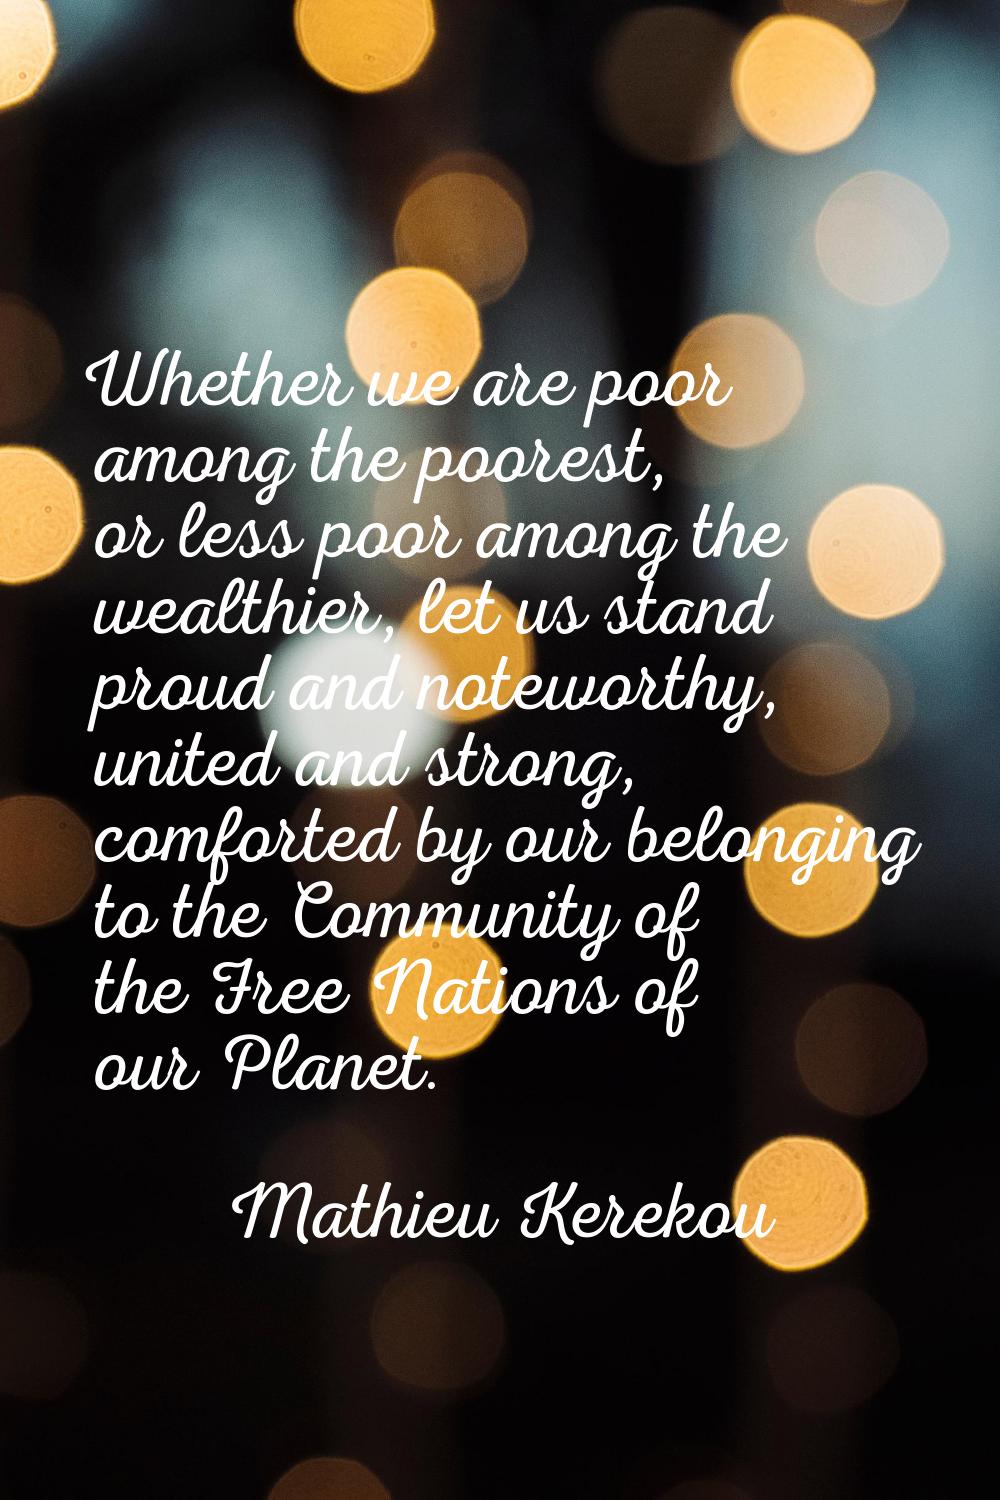 Whether we are poor among the poorest, or less poor among the wealthier, let us stand proud and not